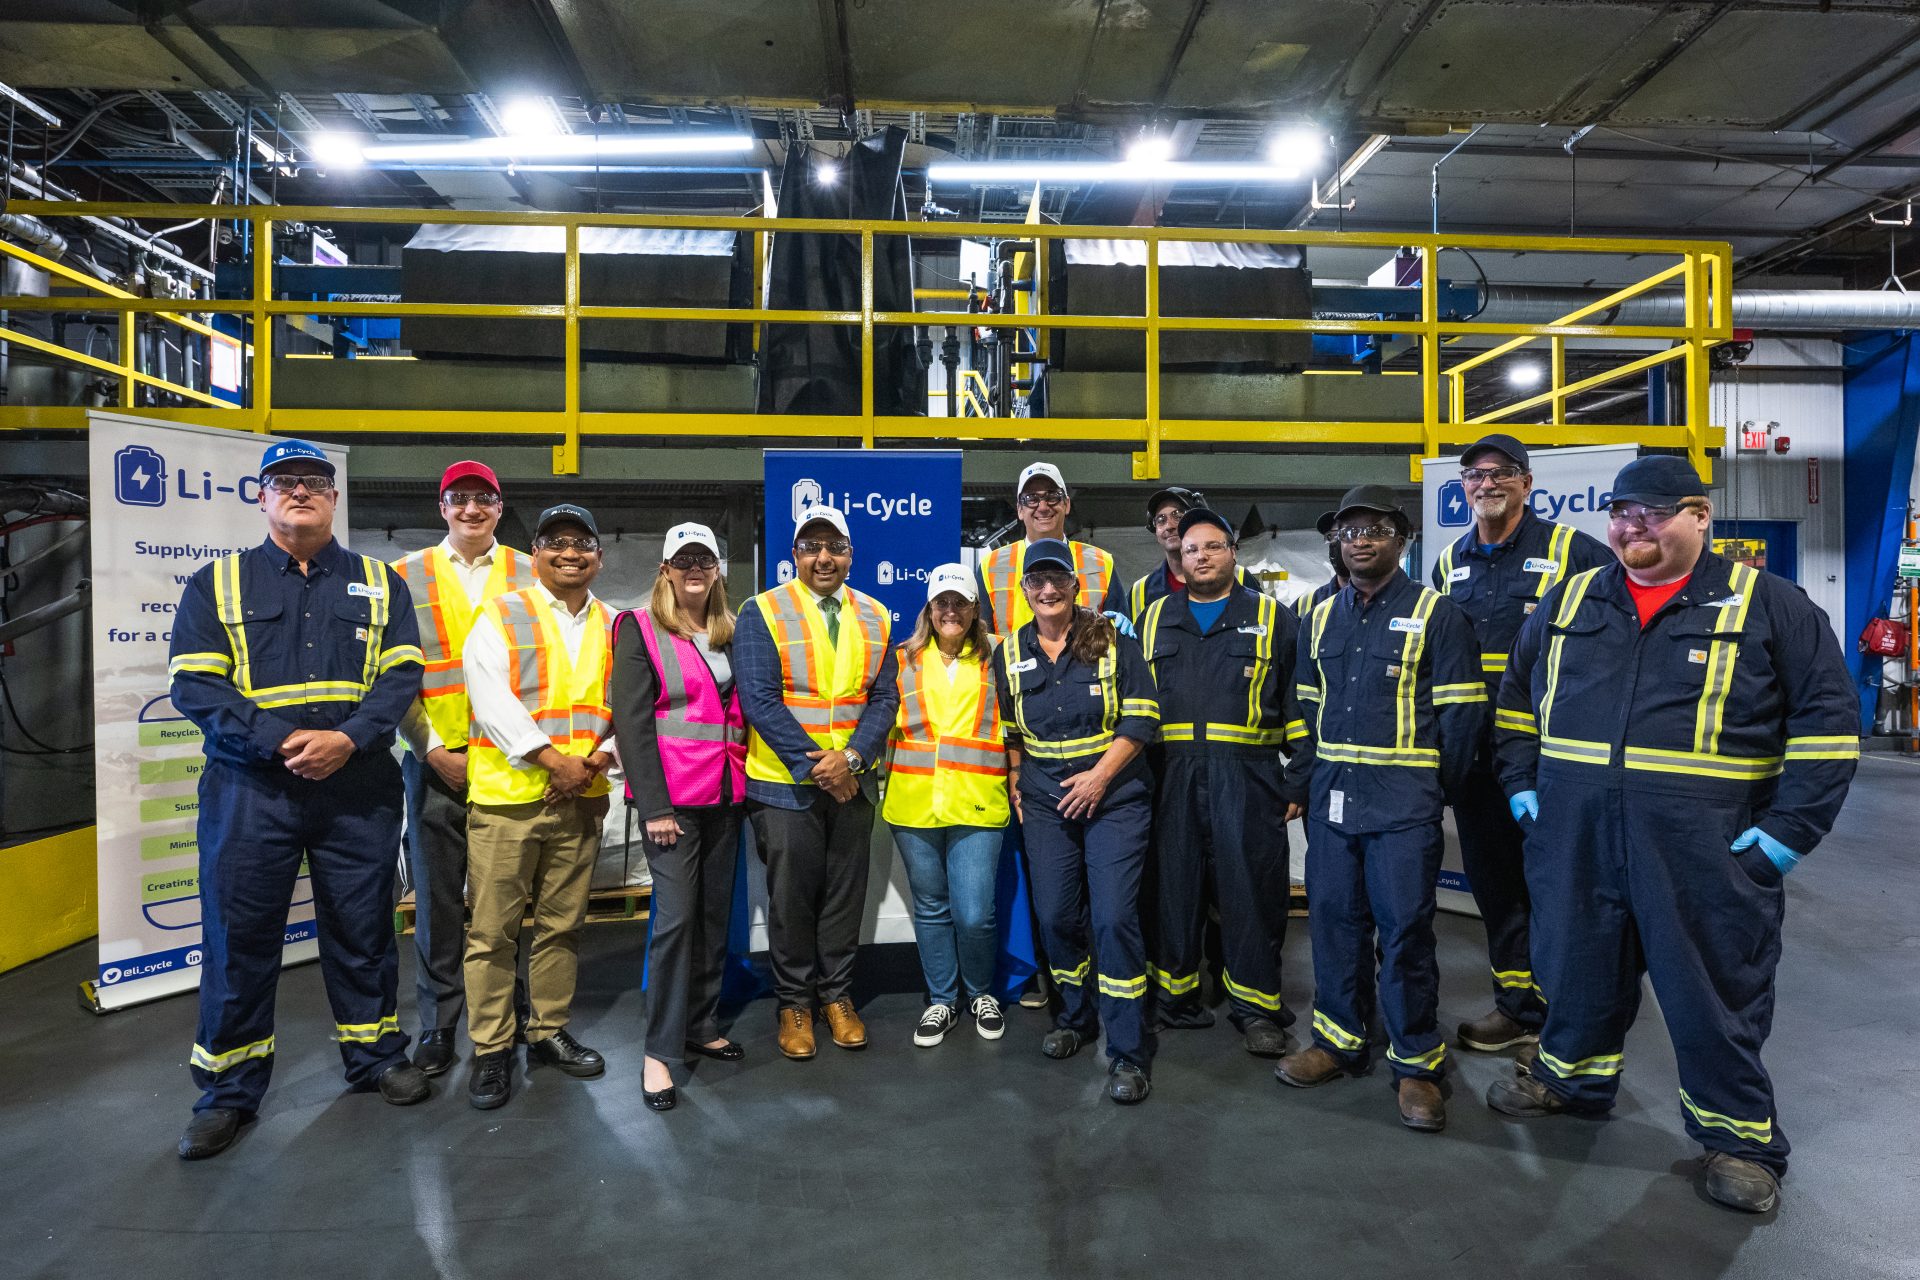 Group photo of Li-Cycle team members wearing safety gear inside industrial building with Li-Cycle President and CEO, co-founder, Ajay Kochhar and Deputy Prime Minister, Chrystia Freeland at the center of group photo.